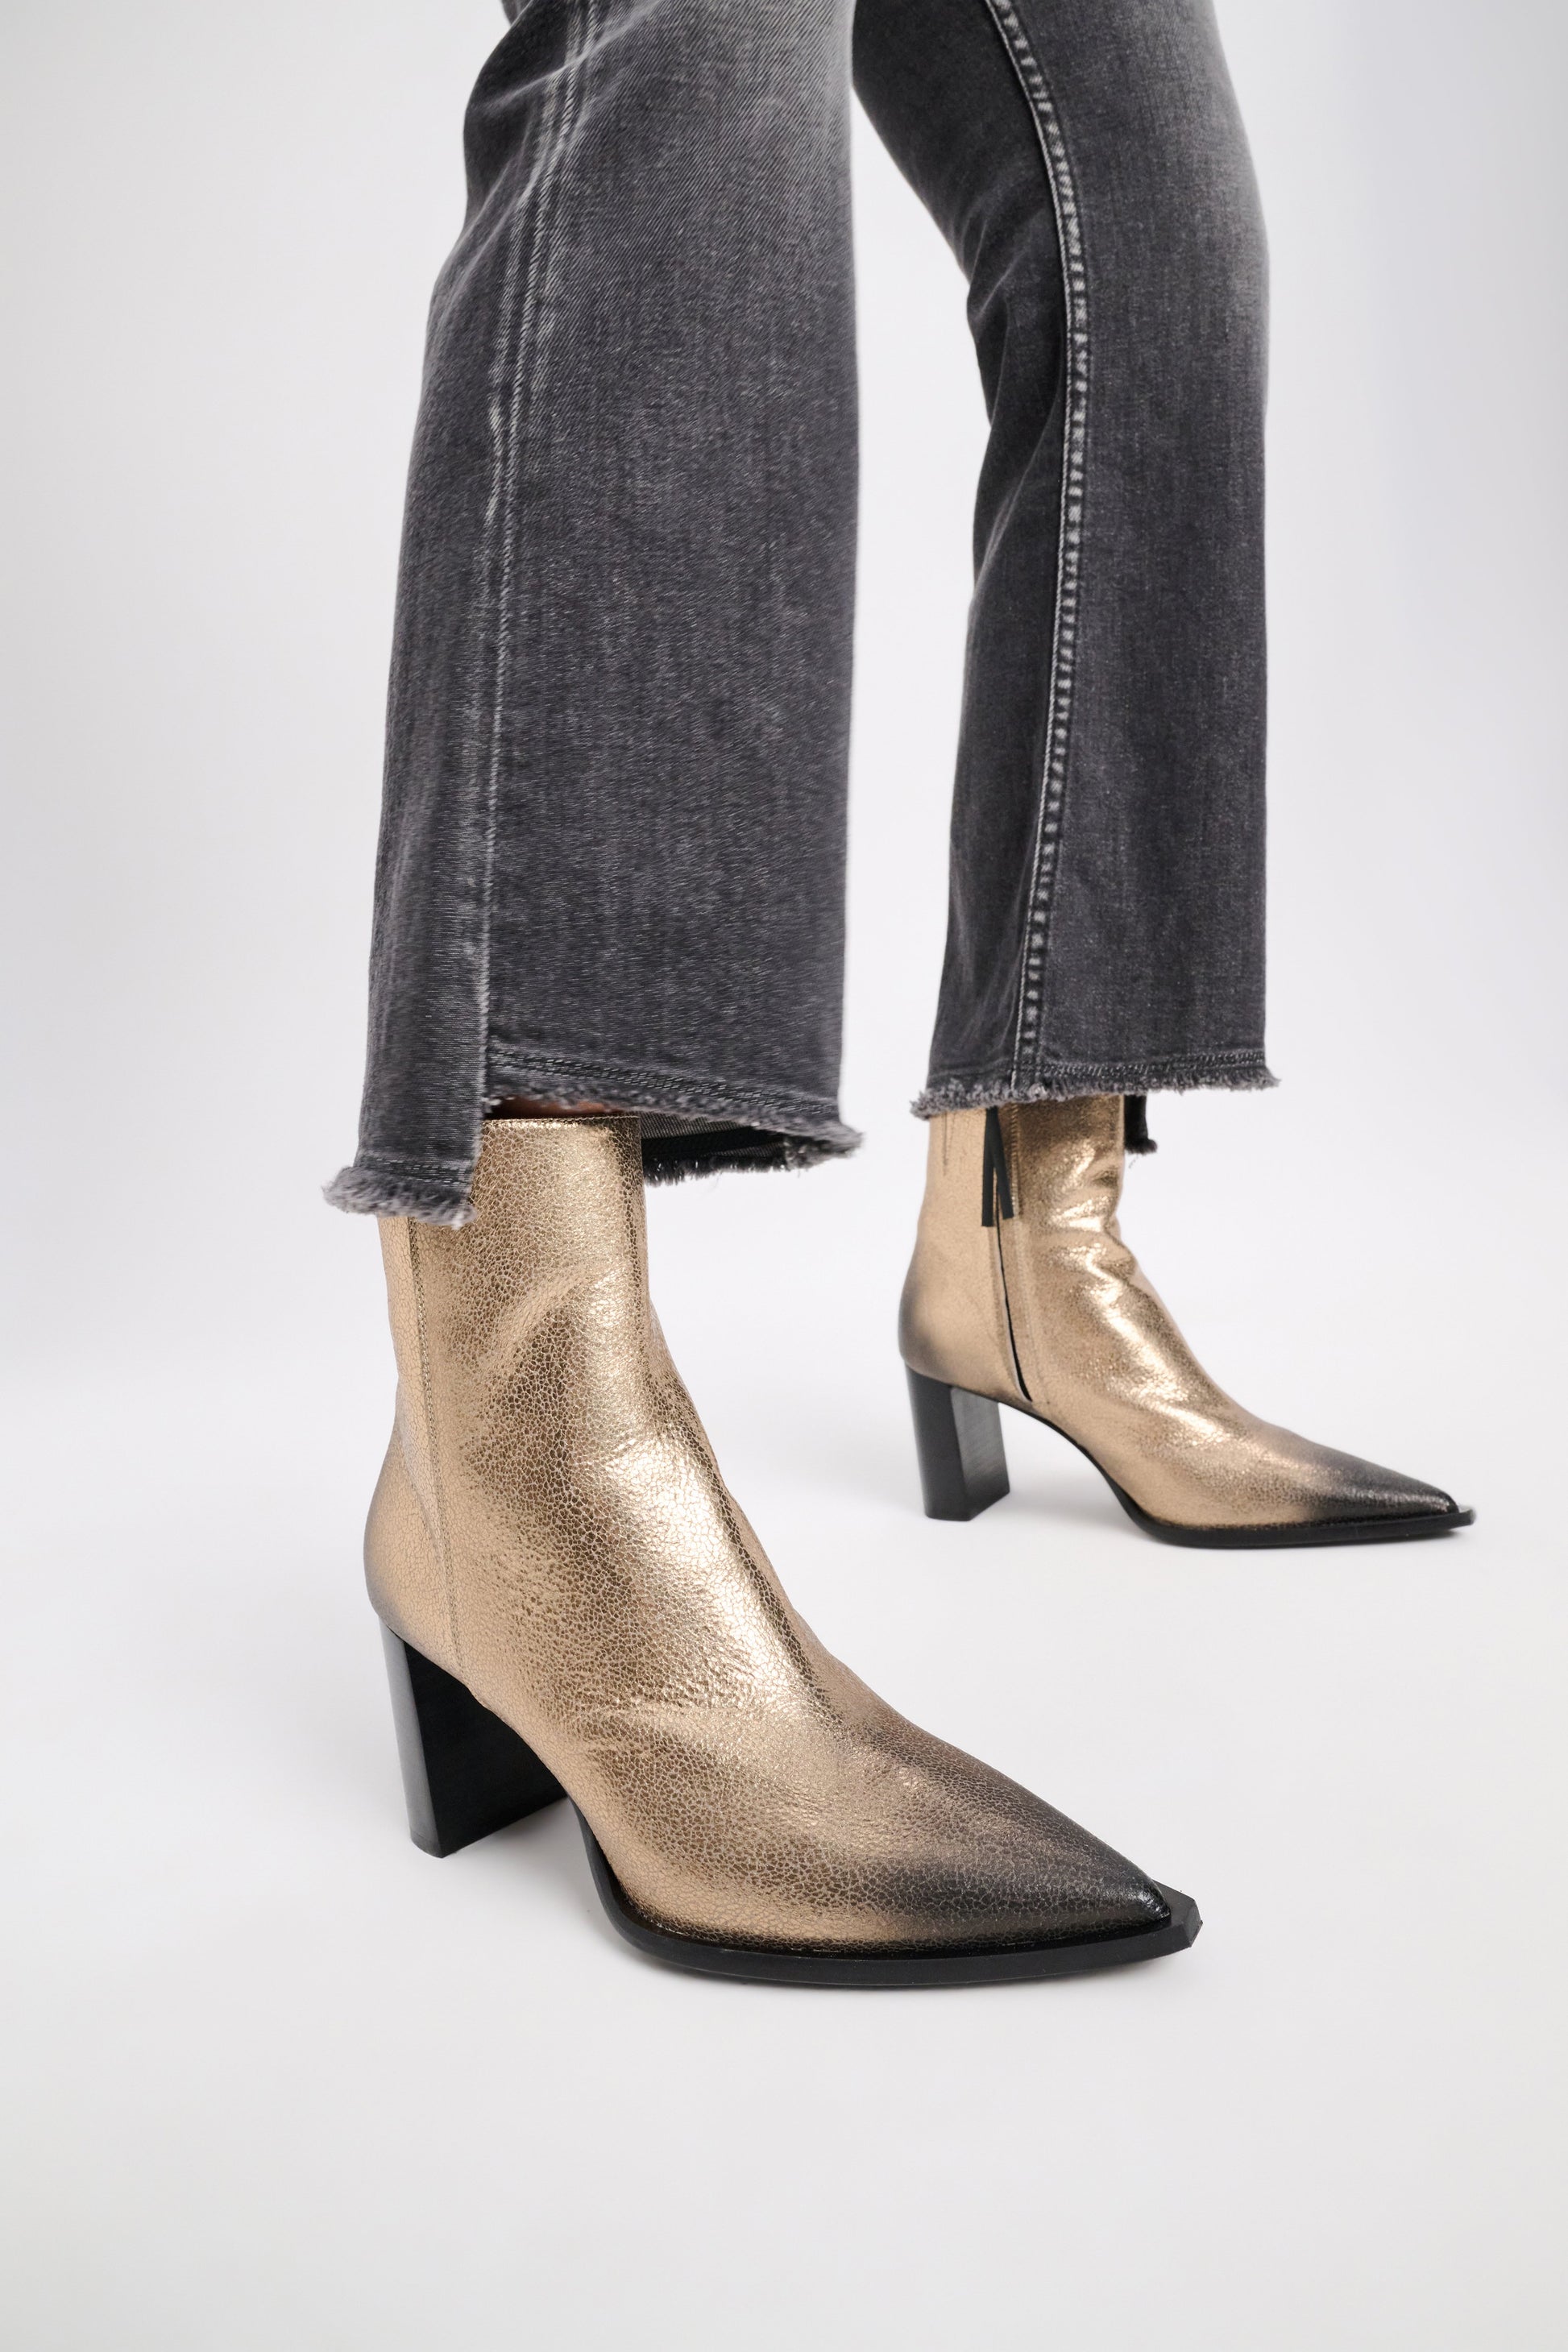 Ankle Boots Metallic Chic in GoldDorothee Schumacher - Anita Hass